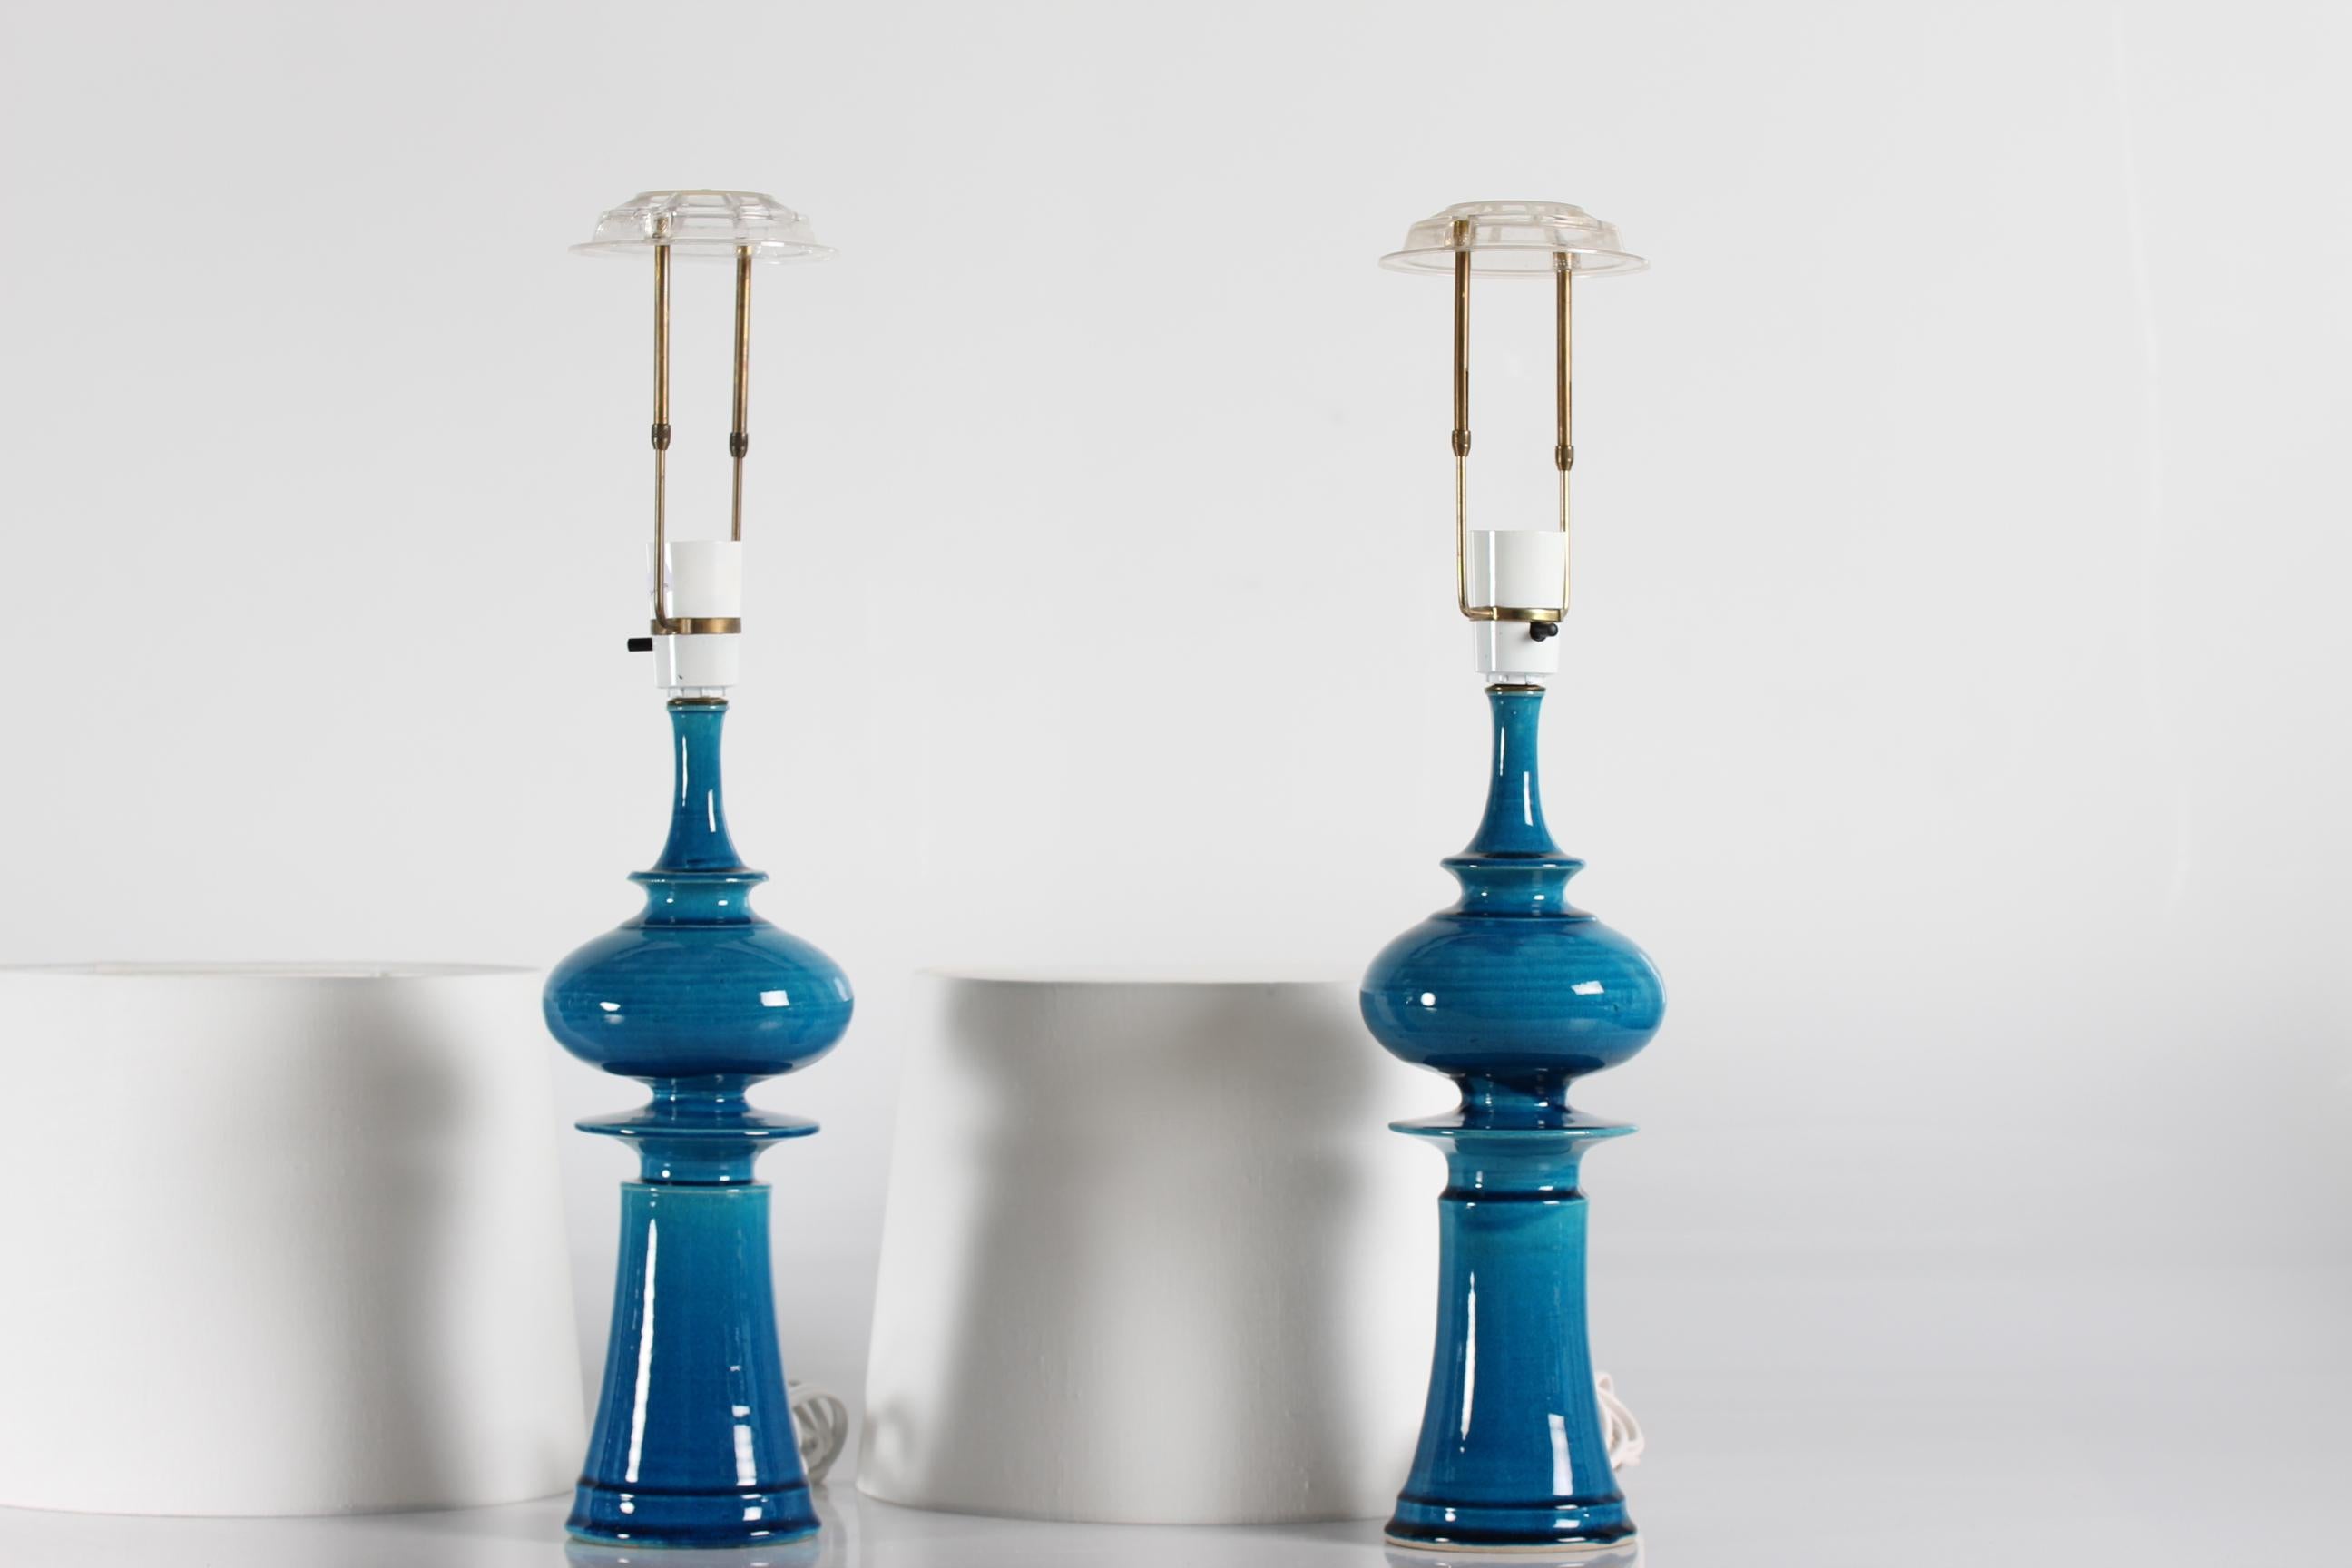 Pair of tall sculptural table lamps by Poul Erik Eliasen for the ceramic studio Kähler (HAK). 
The lamps are made from stoneware with glossy turquoise colored glazed and manufactured ca 1970s.

Marked on bottom with HAK (for Herman August Kähler)